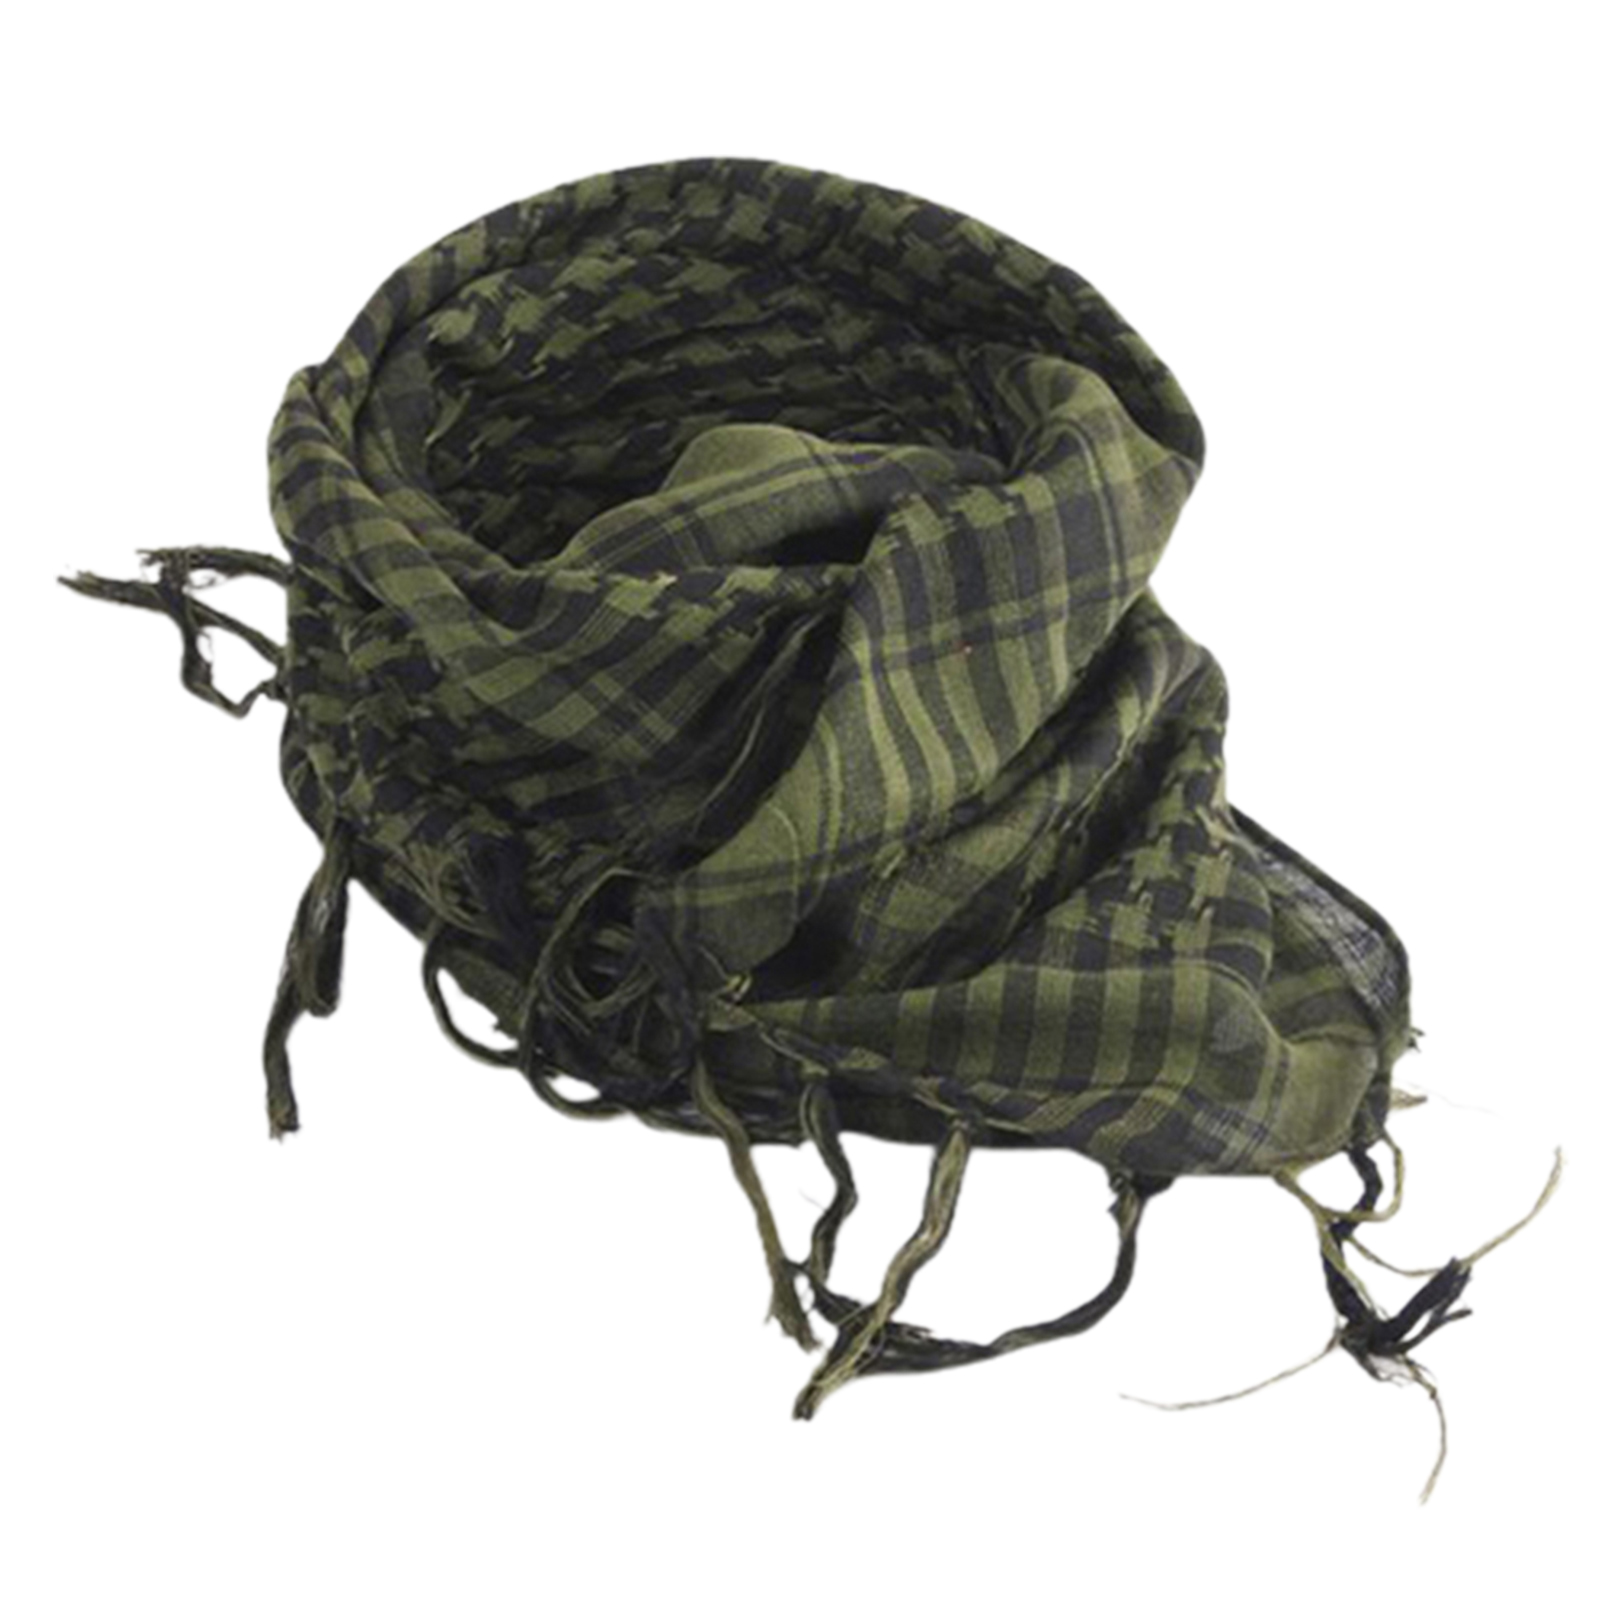 All-match SCARF UNISEX LIGHTWEIGHT PLAID PATTERN COTTON SCARF FOR WINTER